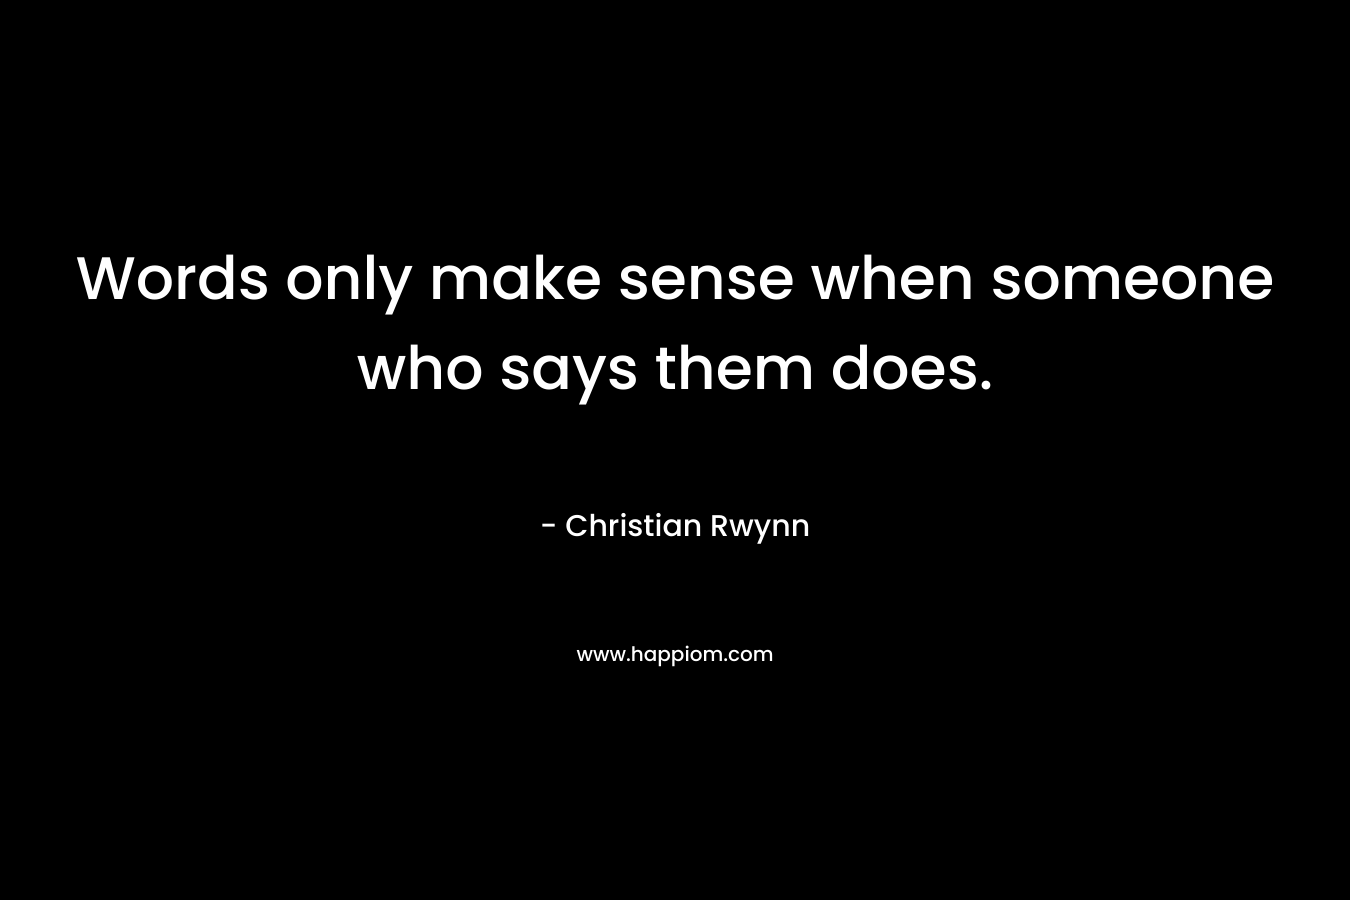 Words only make sense when someone who says them does. – Christian Rwynn